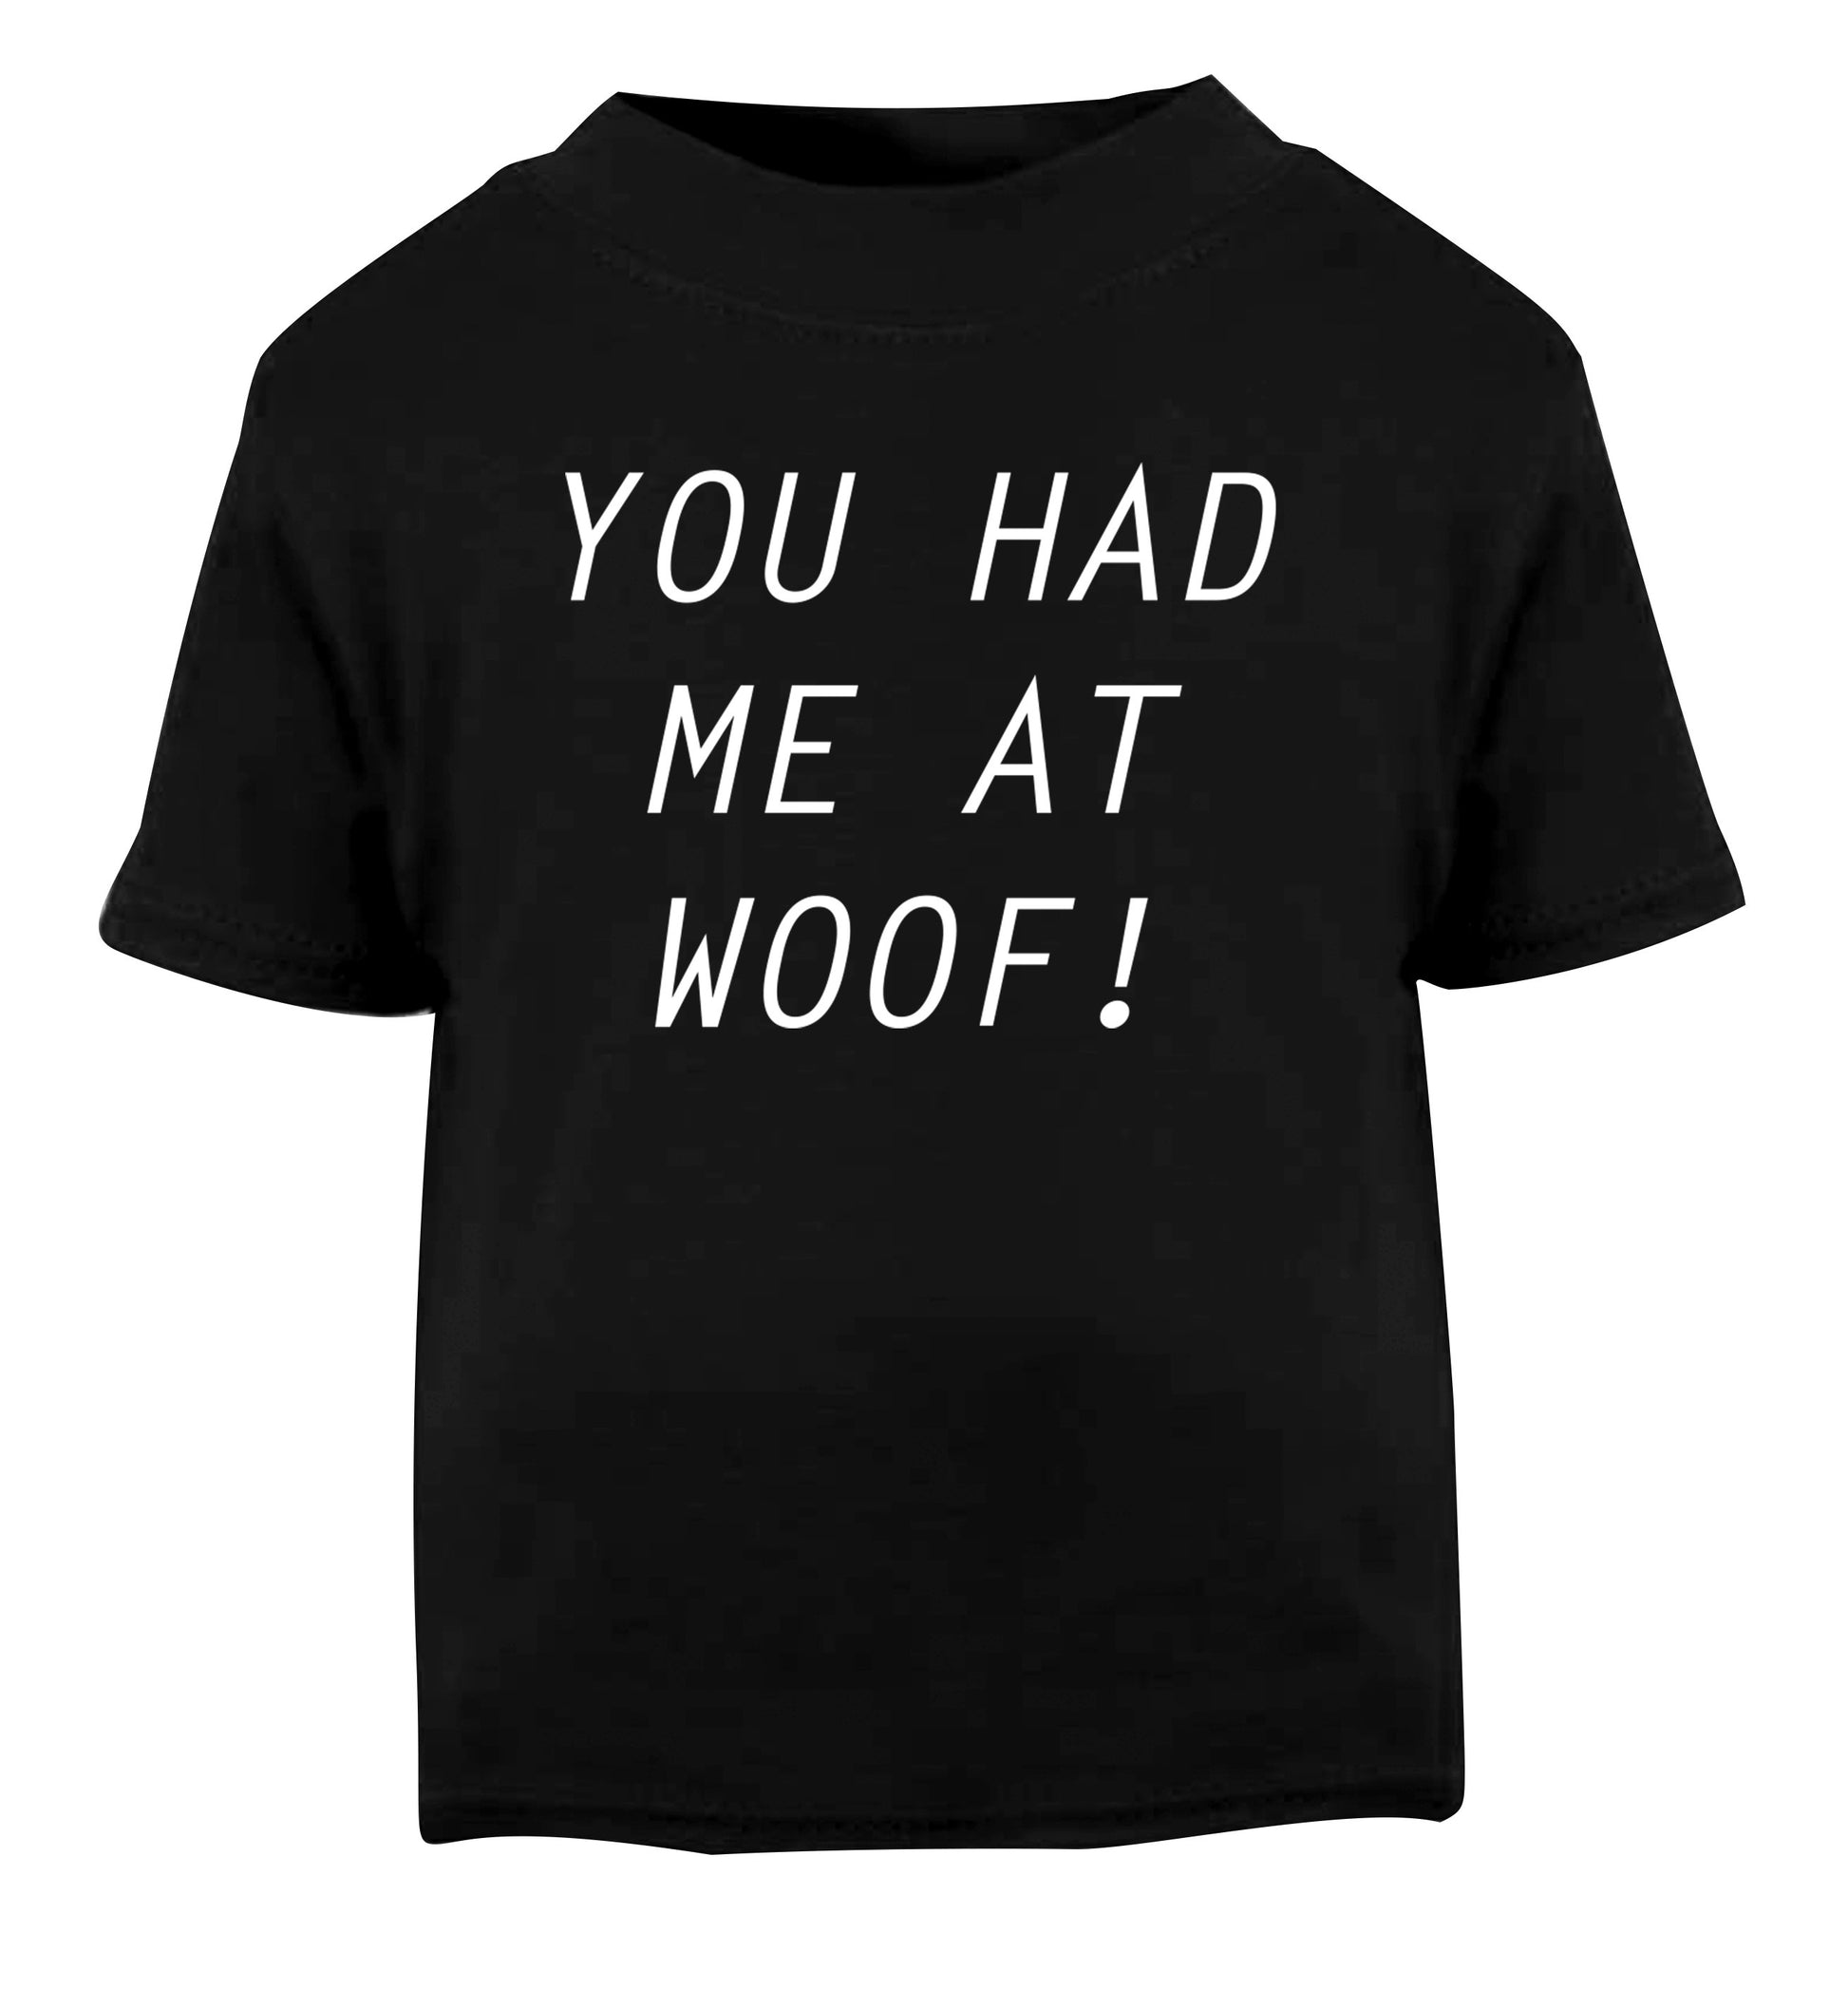 You had me at woof Black Baby Toddler Tshirt 2 years